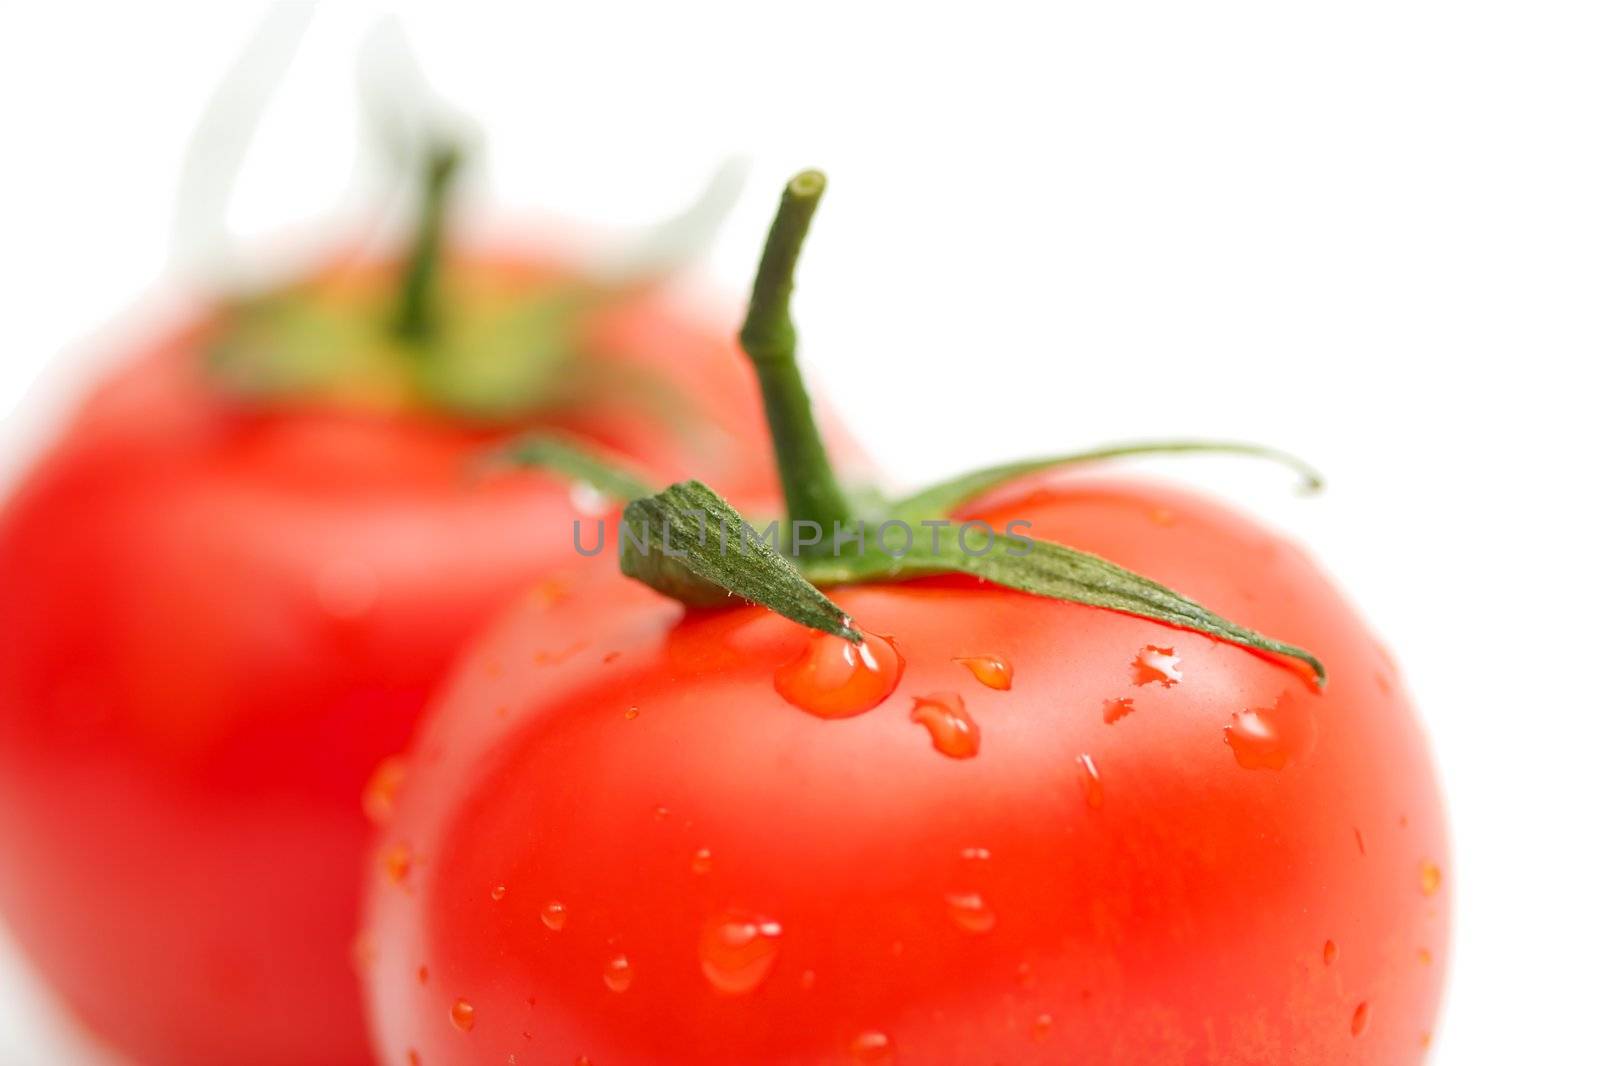 Two perfect red tomatoes on white background